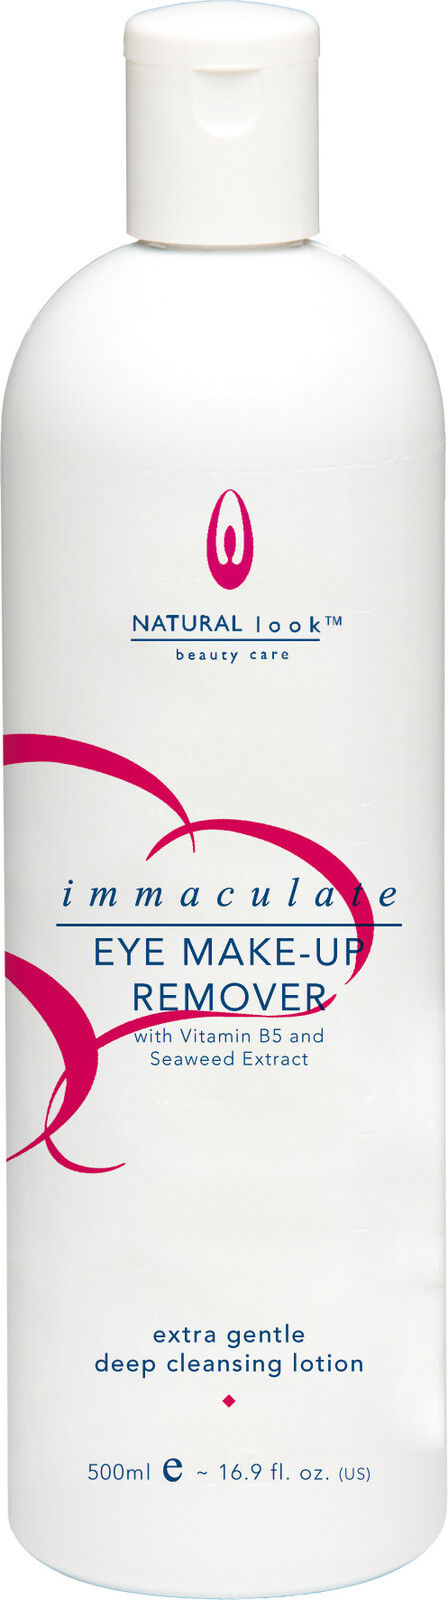 Natural Look Immaculate Eye Make-up Remover 500ml * New Packaging